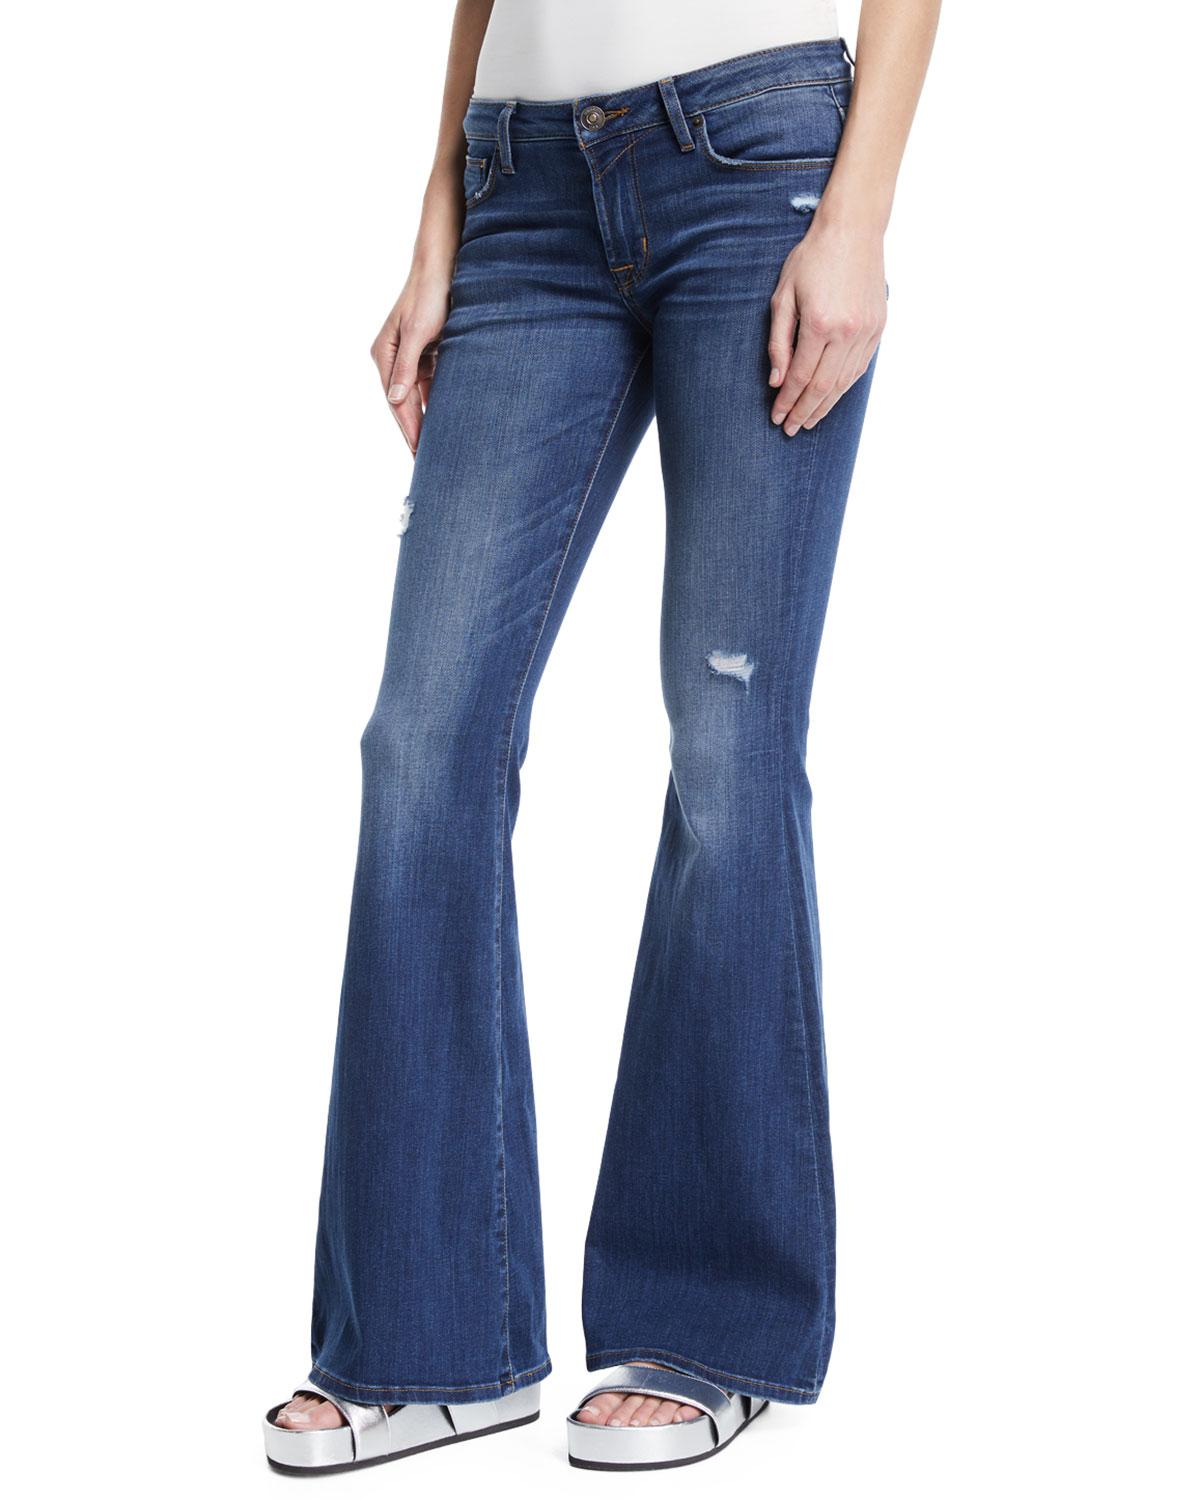 low rise flare leg jeans